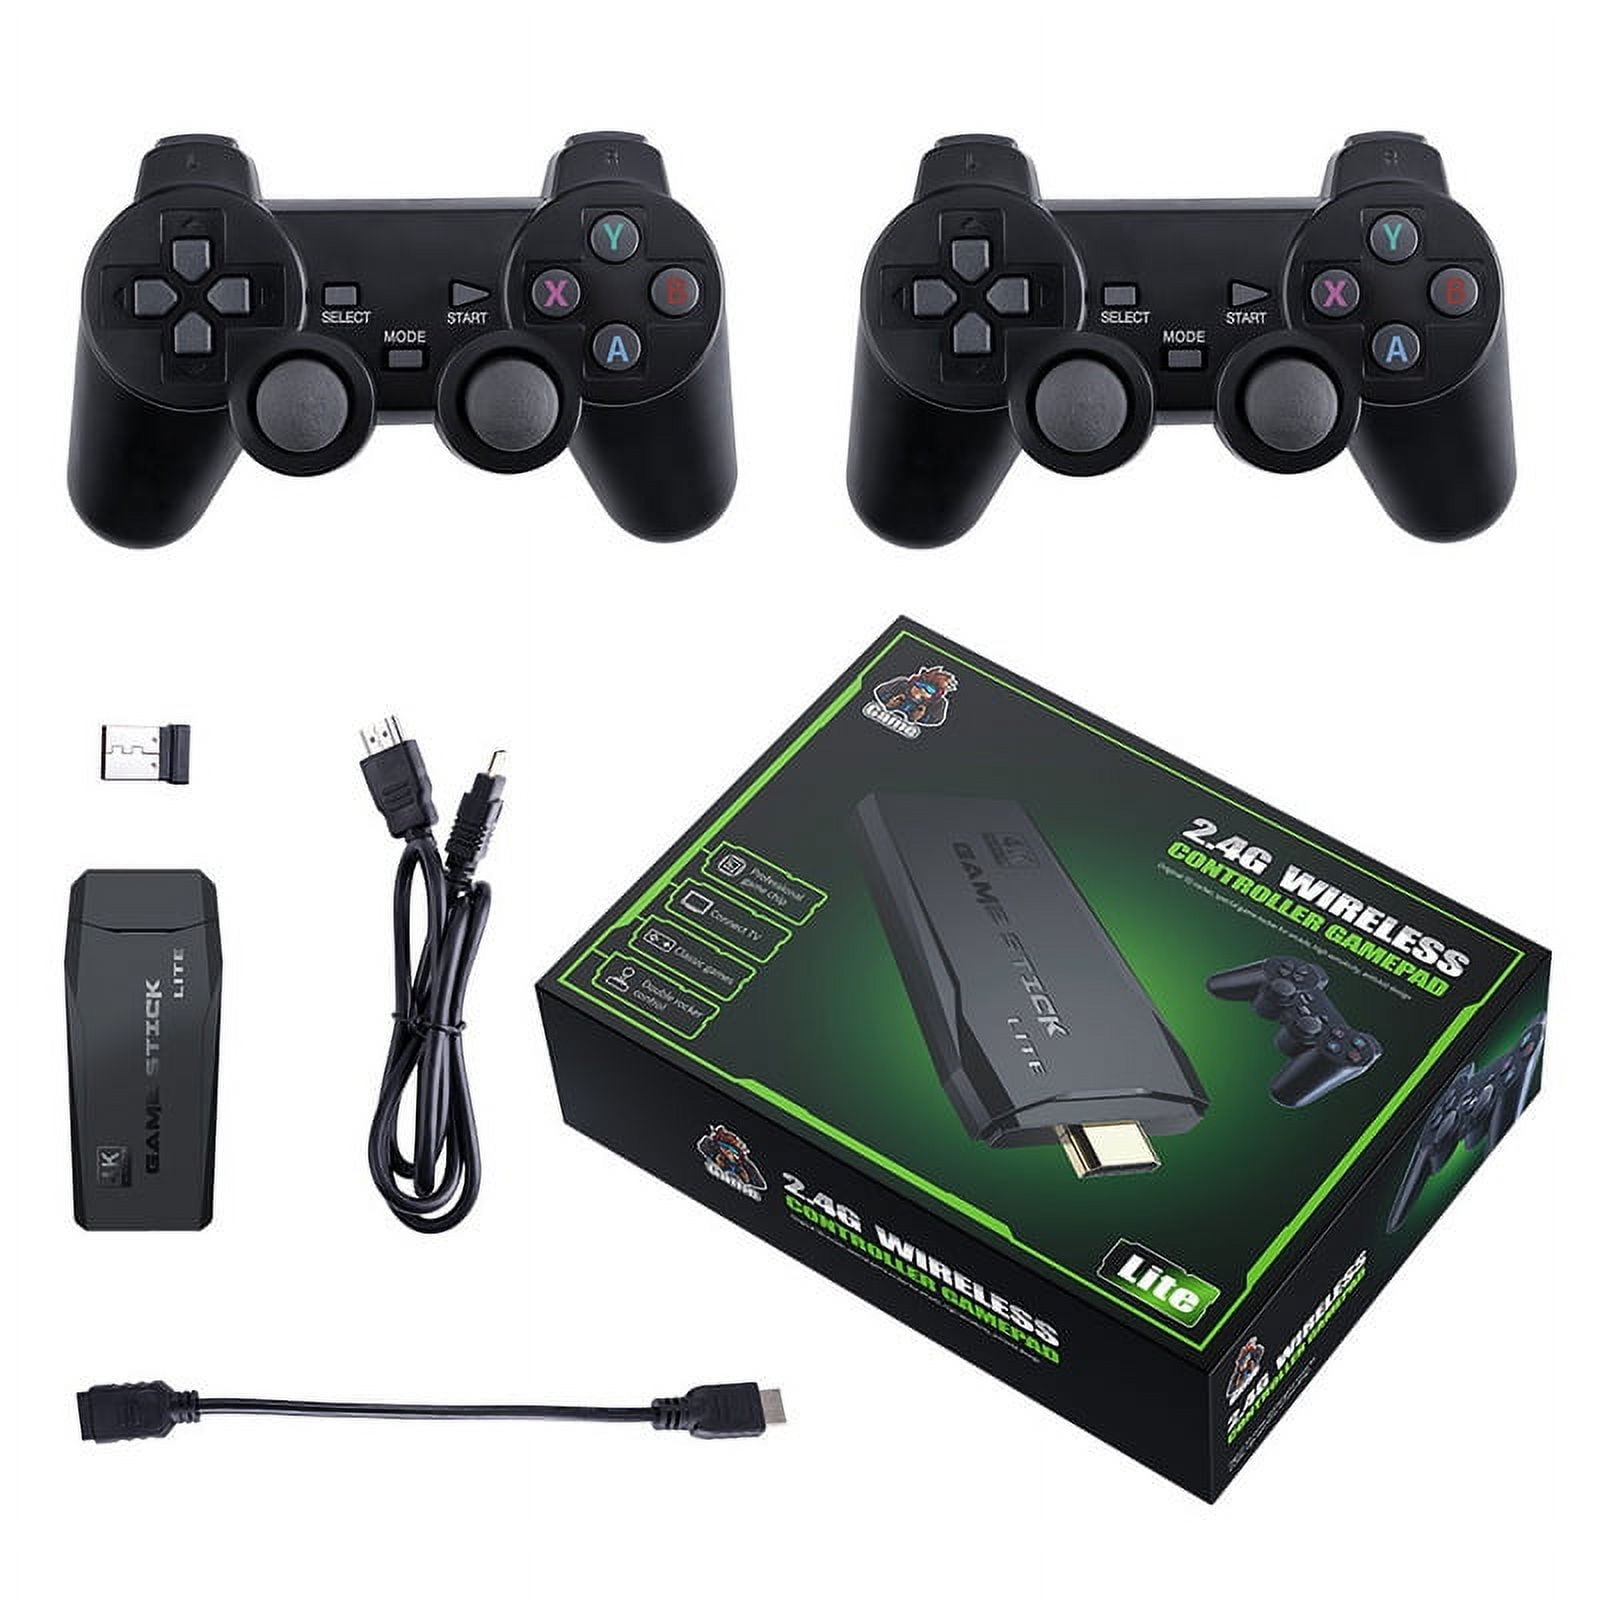 Retro Game Console Stick, 64G Nostalgia Game Stick with 20000+ Video Games,  9 Emulator Console Plug and Play for TV, Retro Play Compatible with